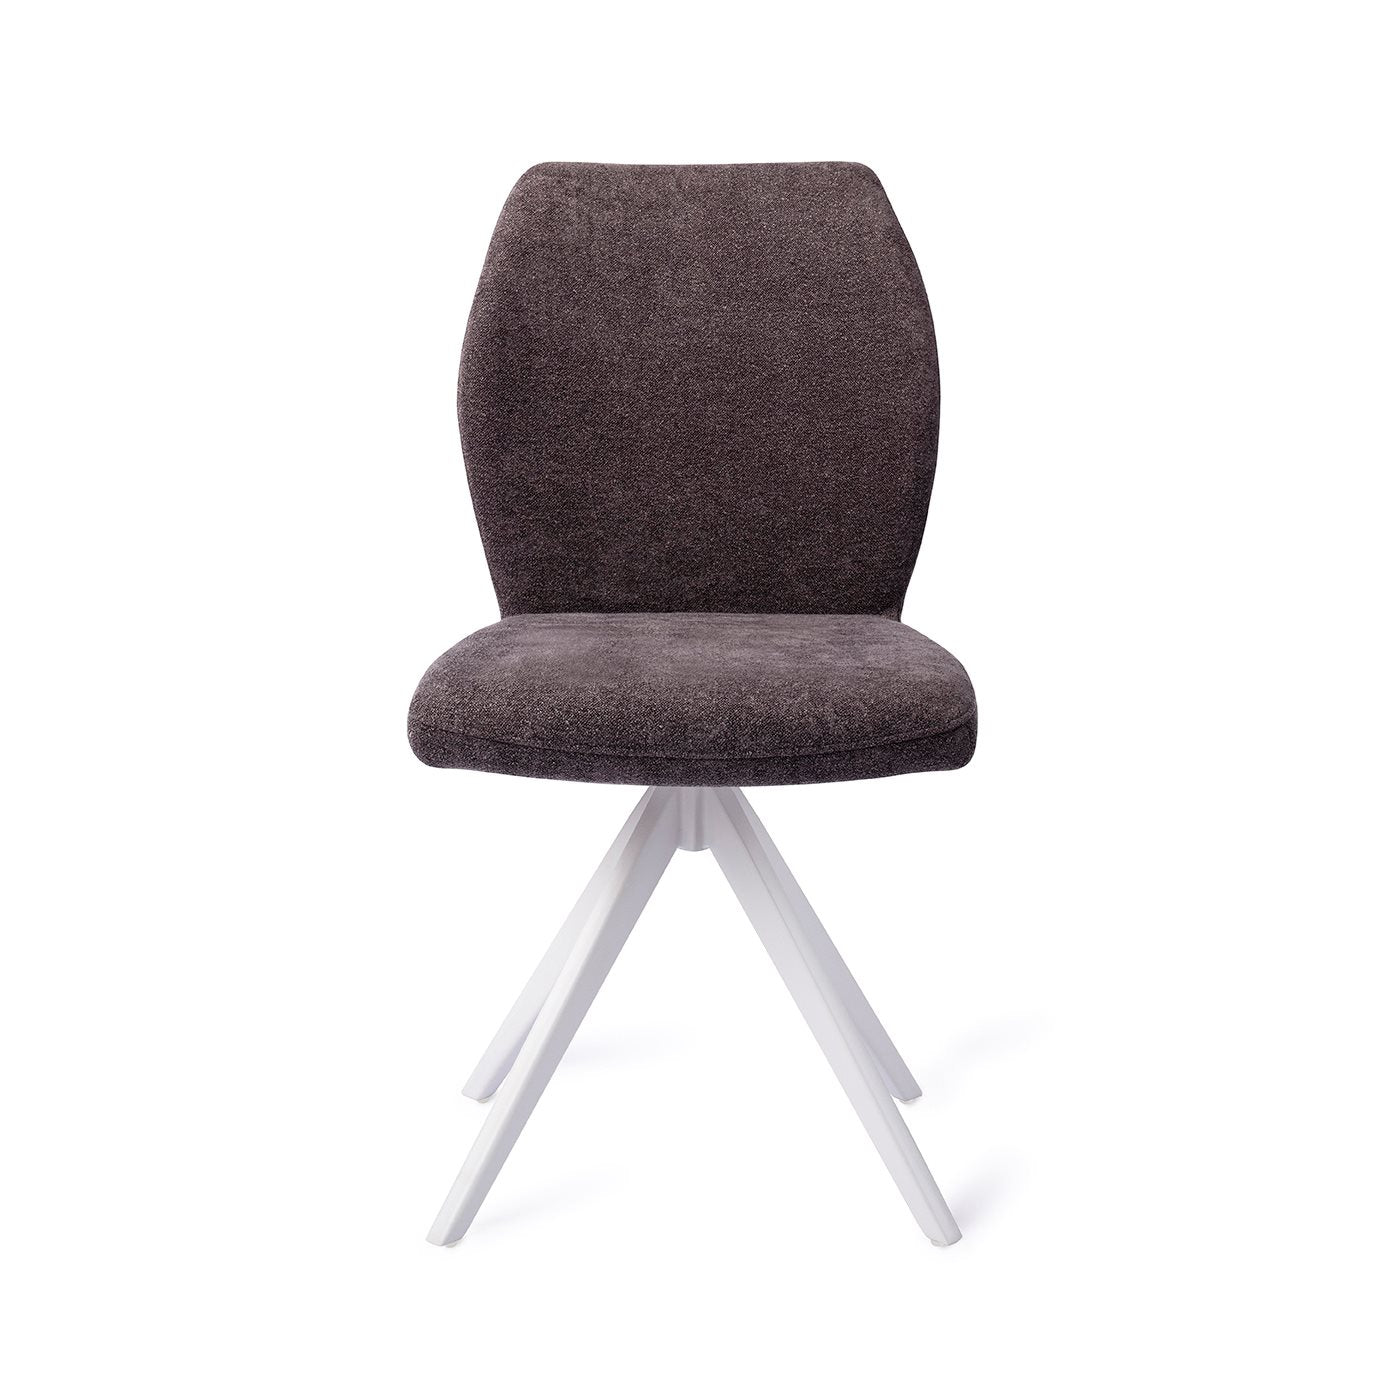 Ikata Dining Chair Almost Black Turn White